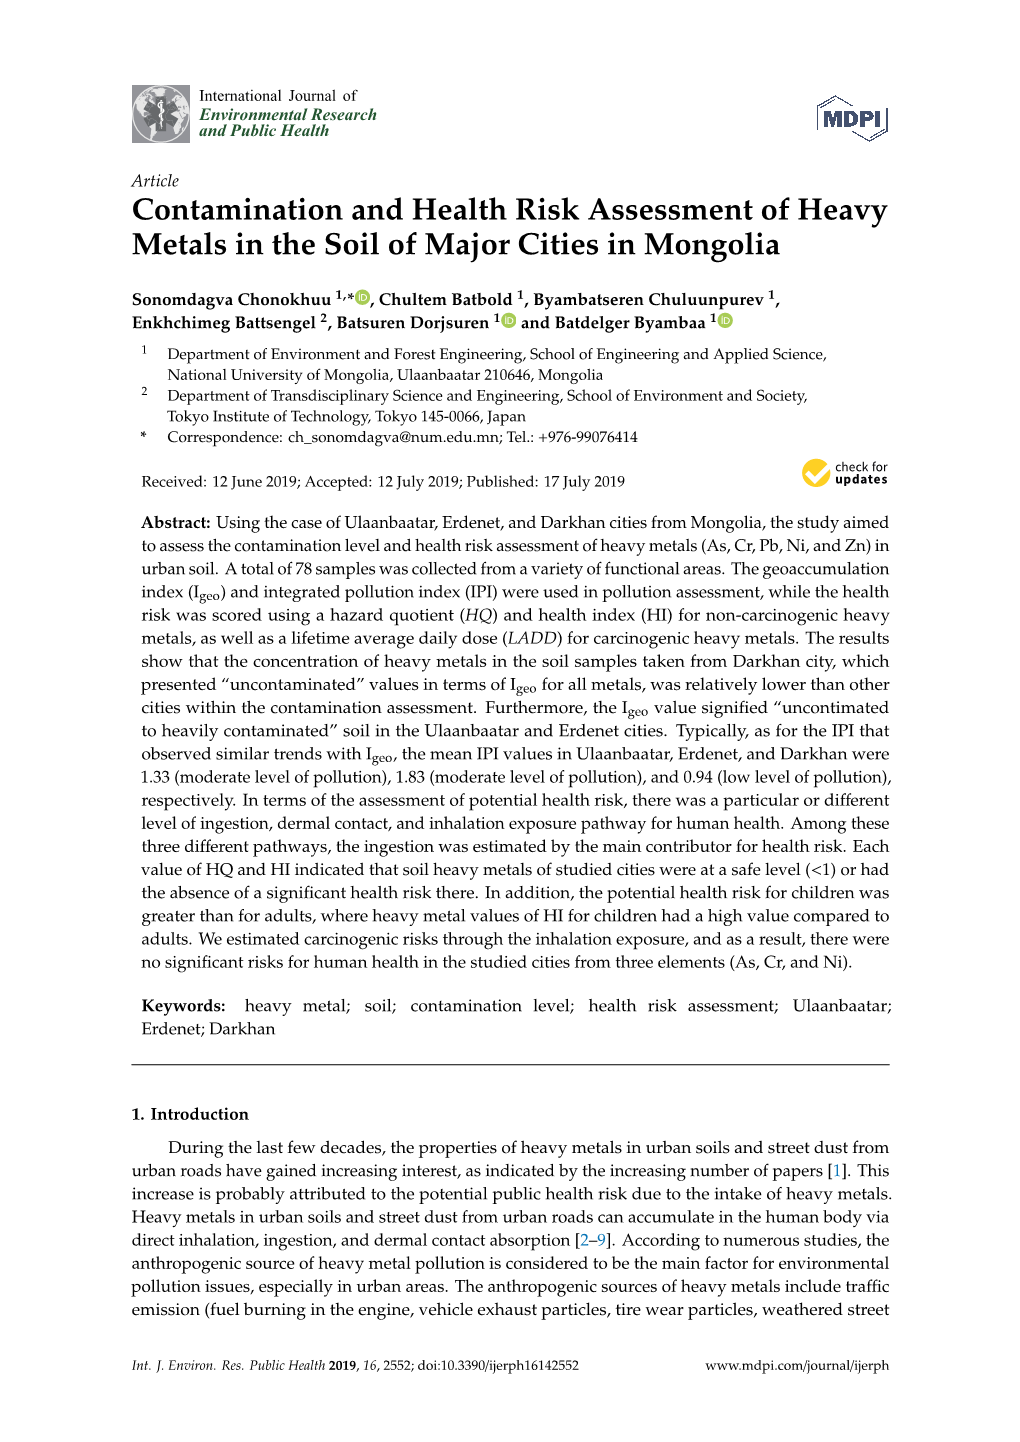 Contamination and Health Risk Assessment of Heavy Metals in the Soil of Major Cities in Mongolia